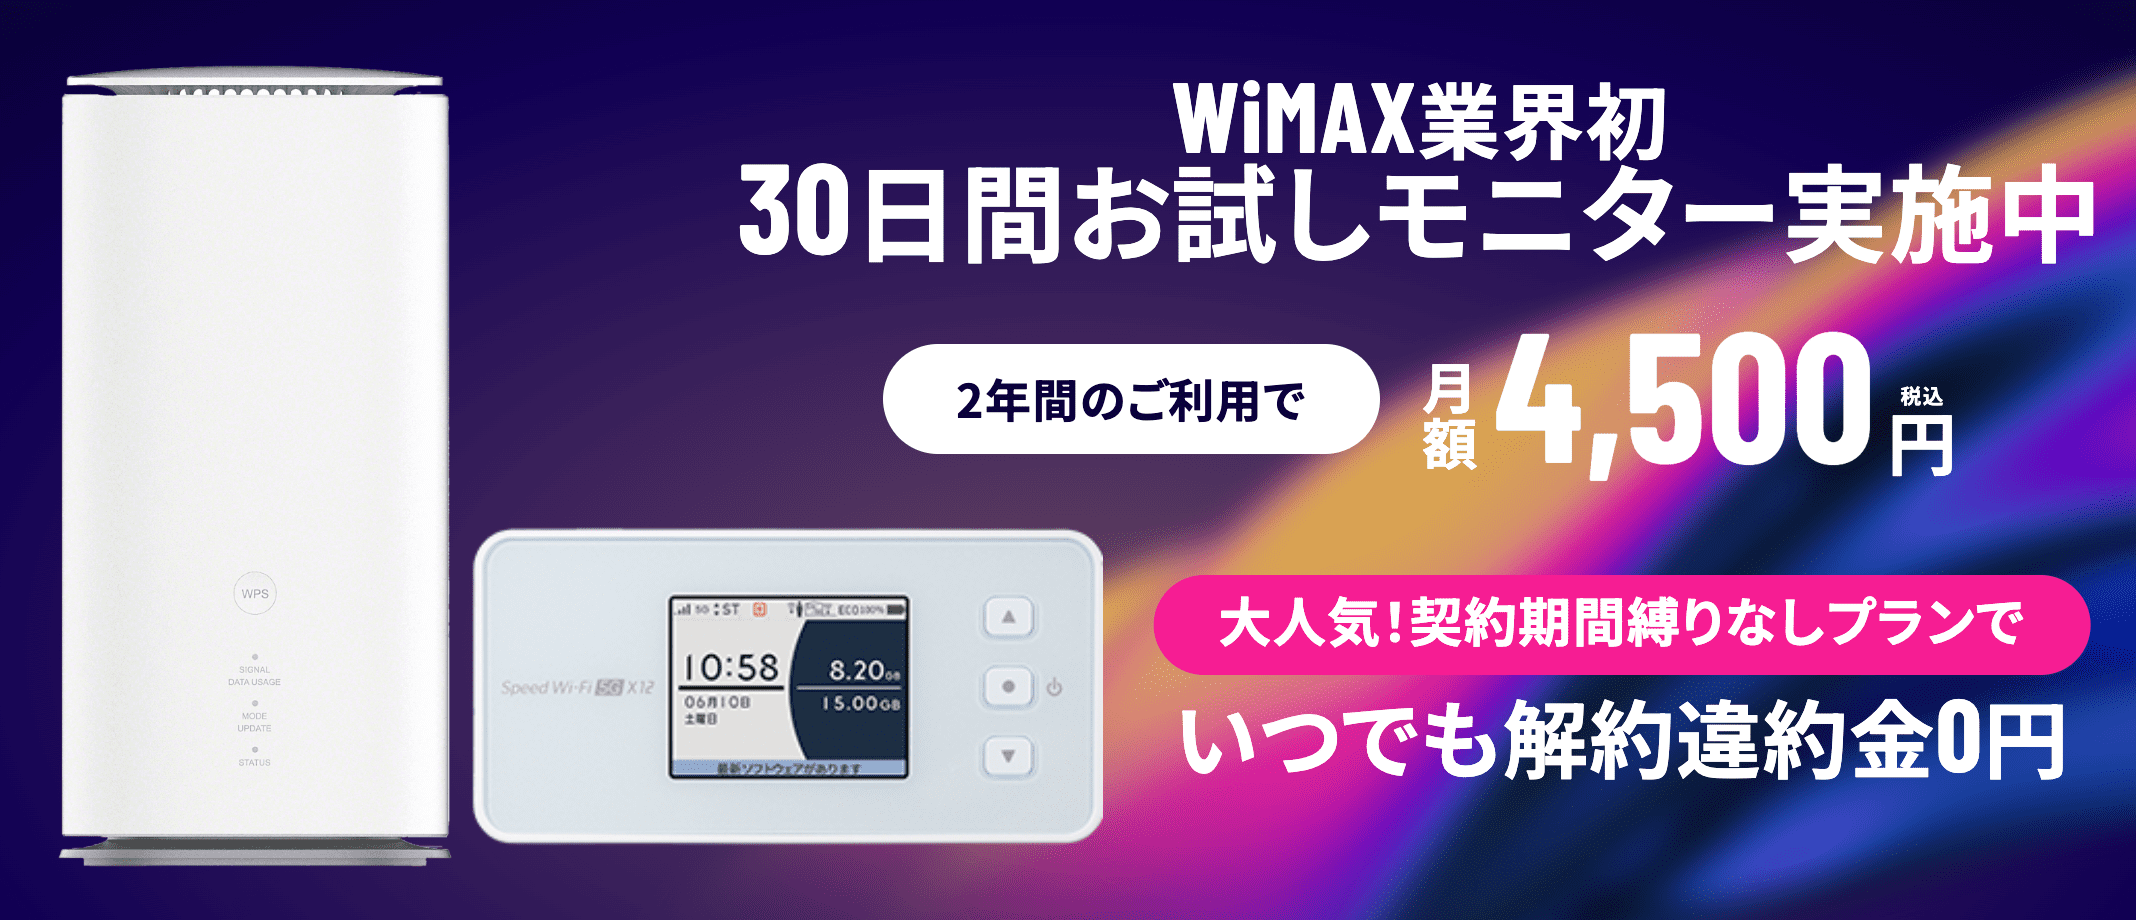 ５G CONNECTの評判・口コミ丸わかり！ | wifi-atoz